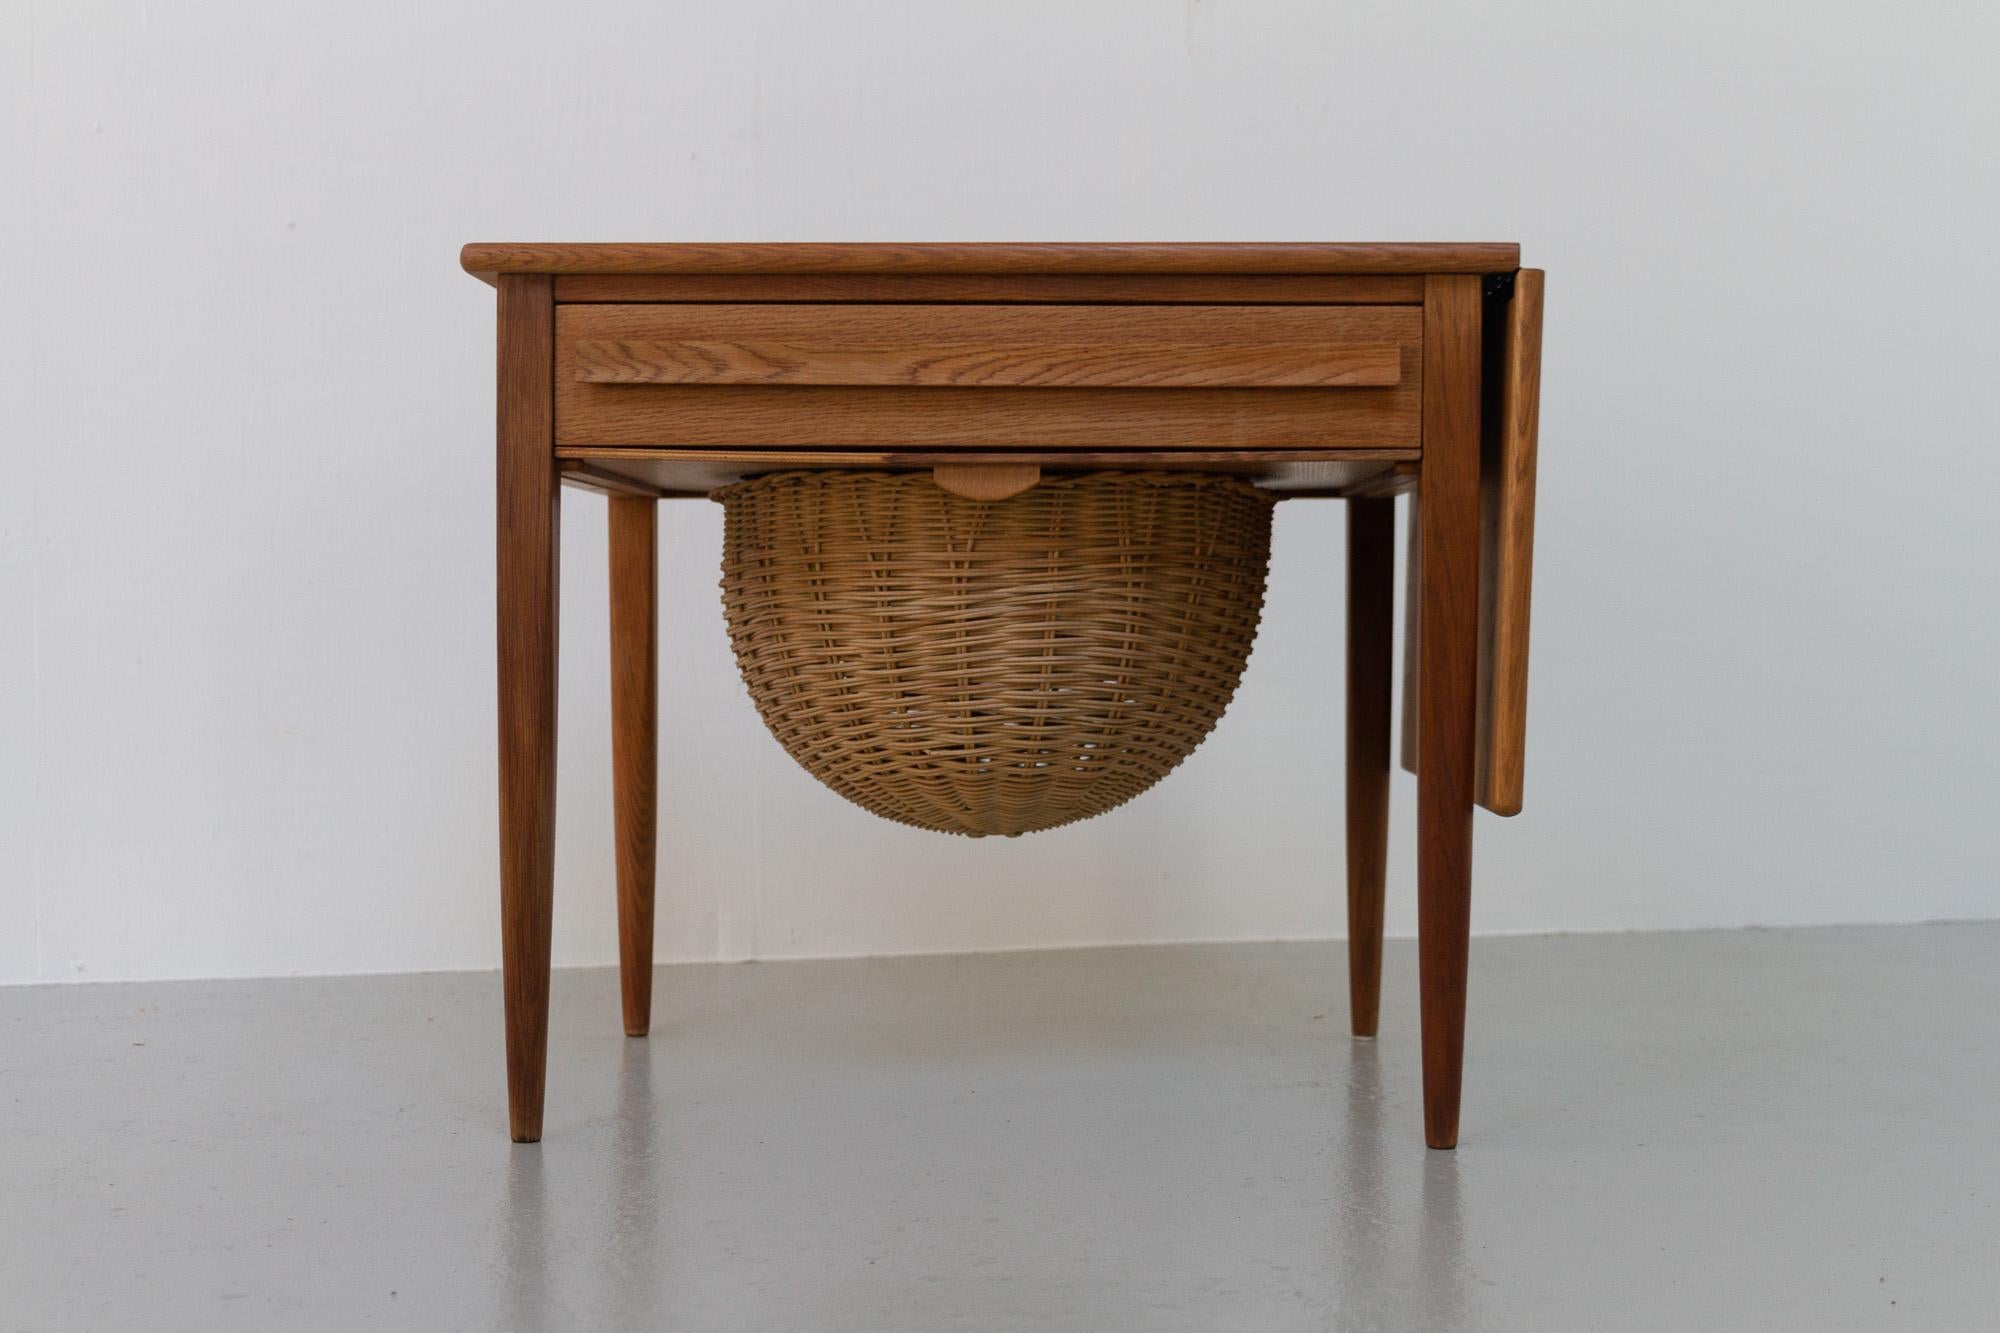 Vintage Danish Oak Sewing Table by Johannes Andersen, 1960s.

Elegant and versatile small table with drawer and wicker basket designed by Danish architect Johannes Andersen for CFC Silkeborg, Denmark in the 1960s.
The drawer features several